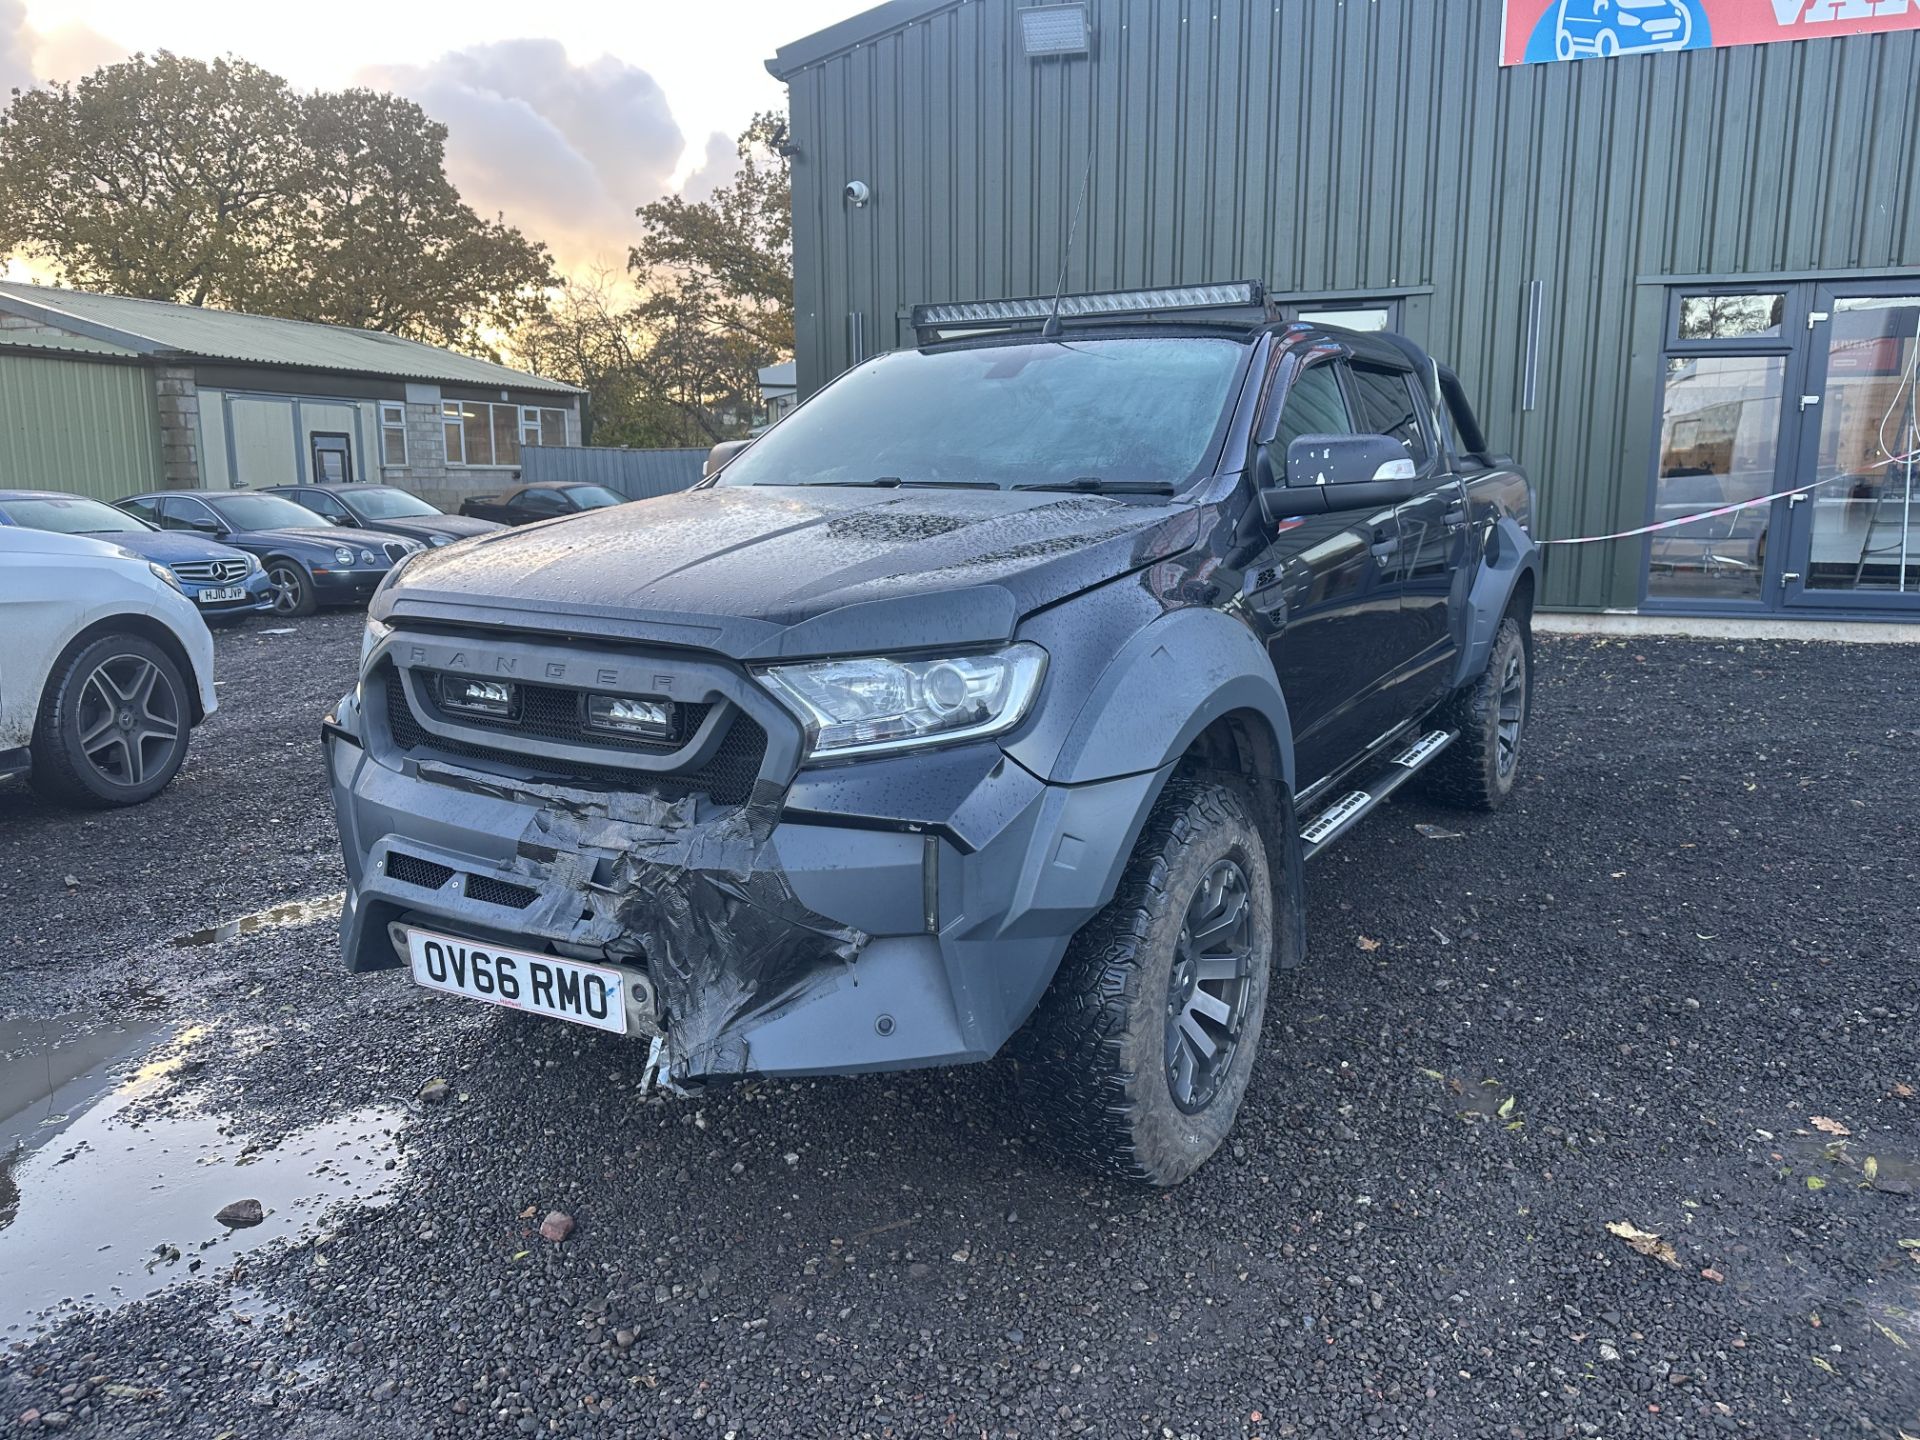 OV66RMO Model: 66 PLATE FORD RANGER LIMITED MSRT 4X4 3.2 TDCI AUTOMATIC - Image 23 of 23